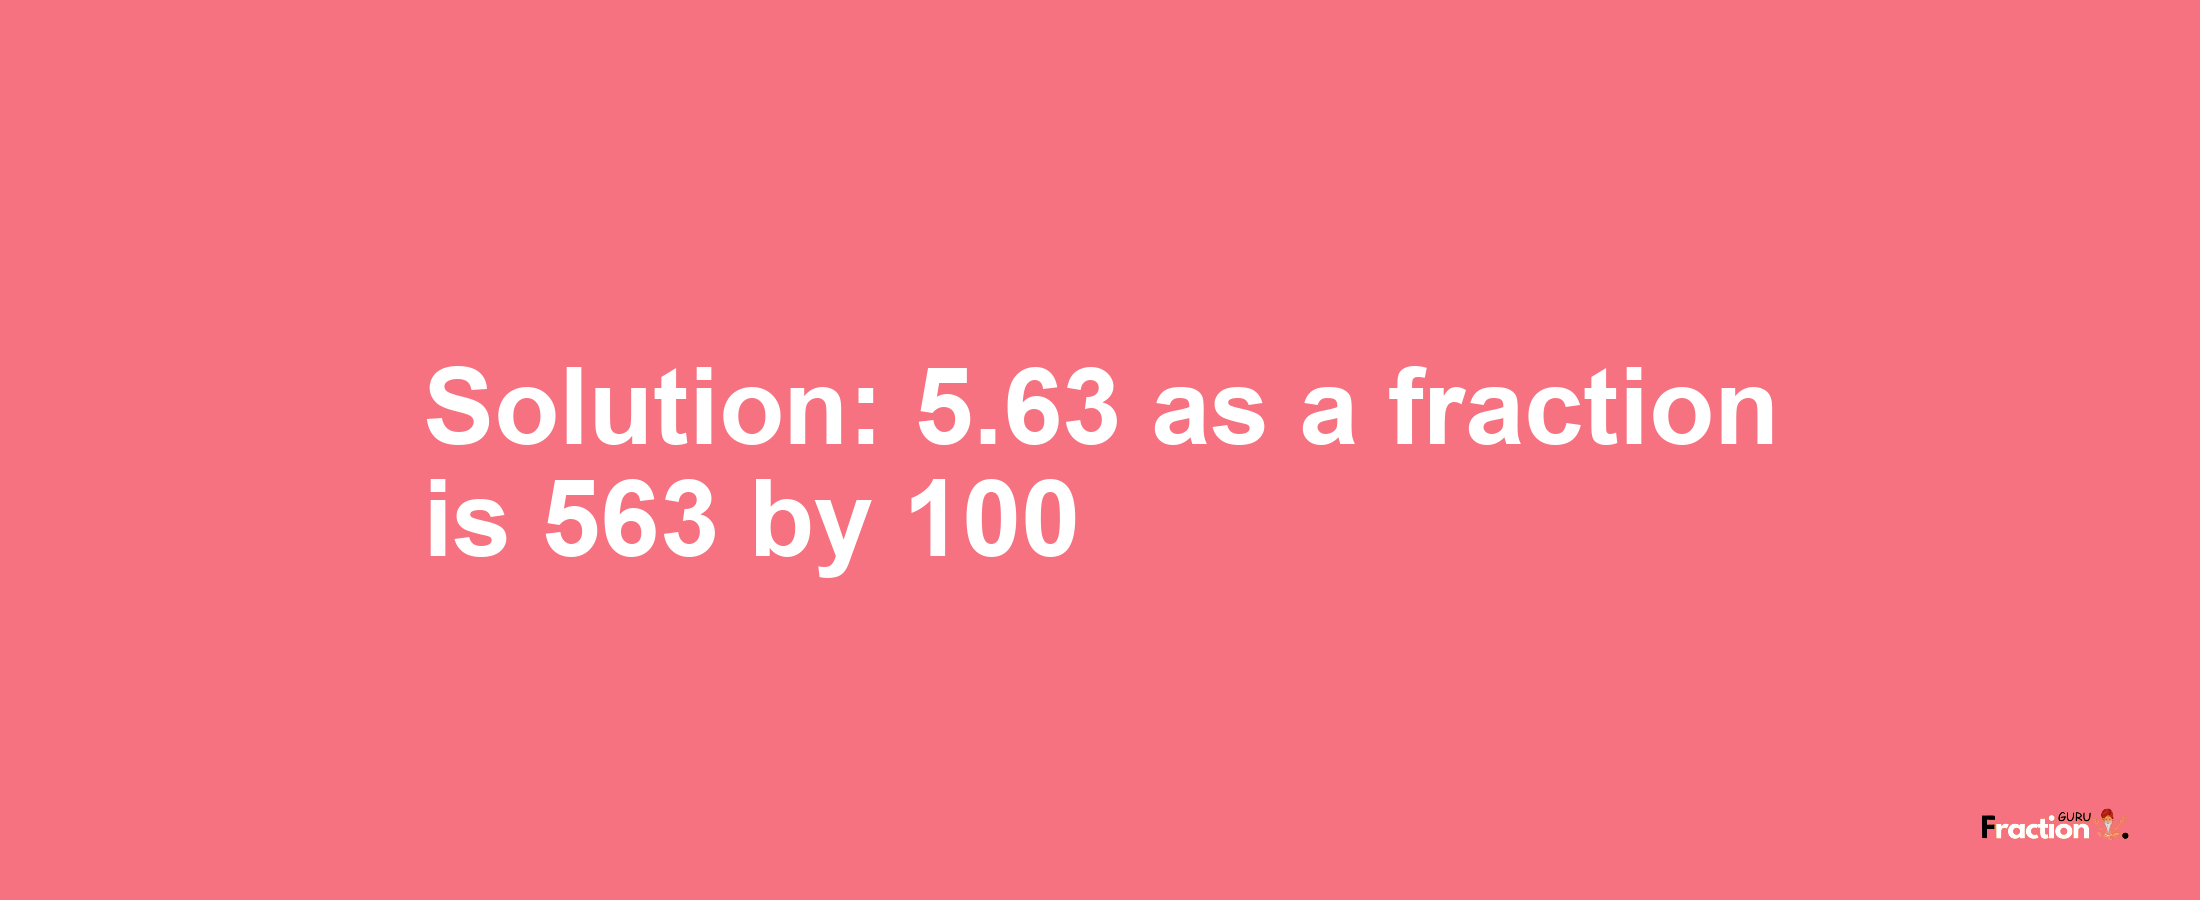 Solution:5.63 as a fraction is 563/100